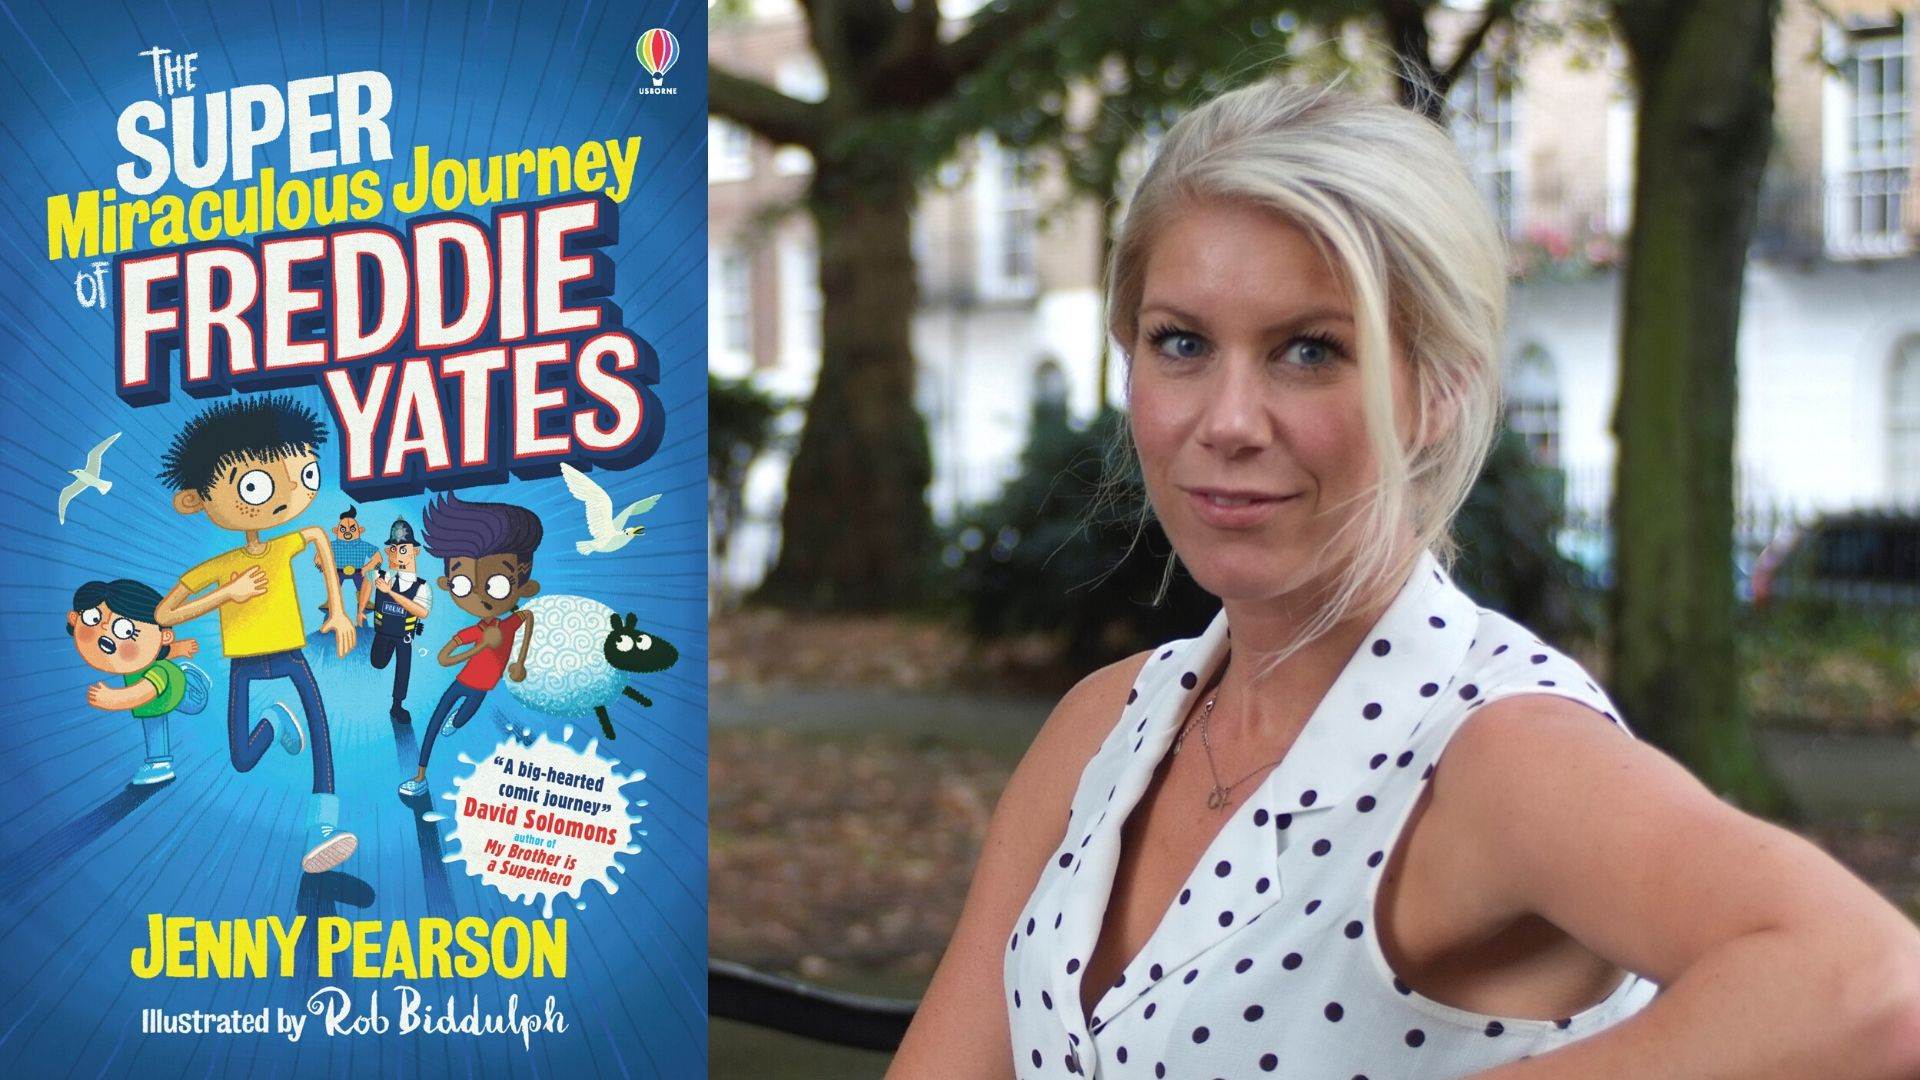 Author Jenny Pearson and the cover of The Super Miraculous Journey of Freddie Yates